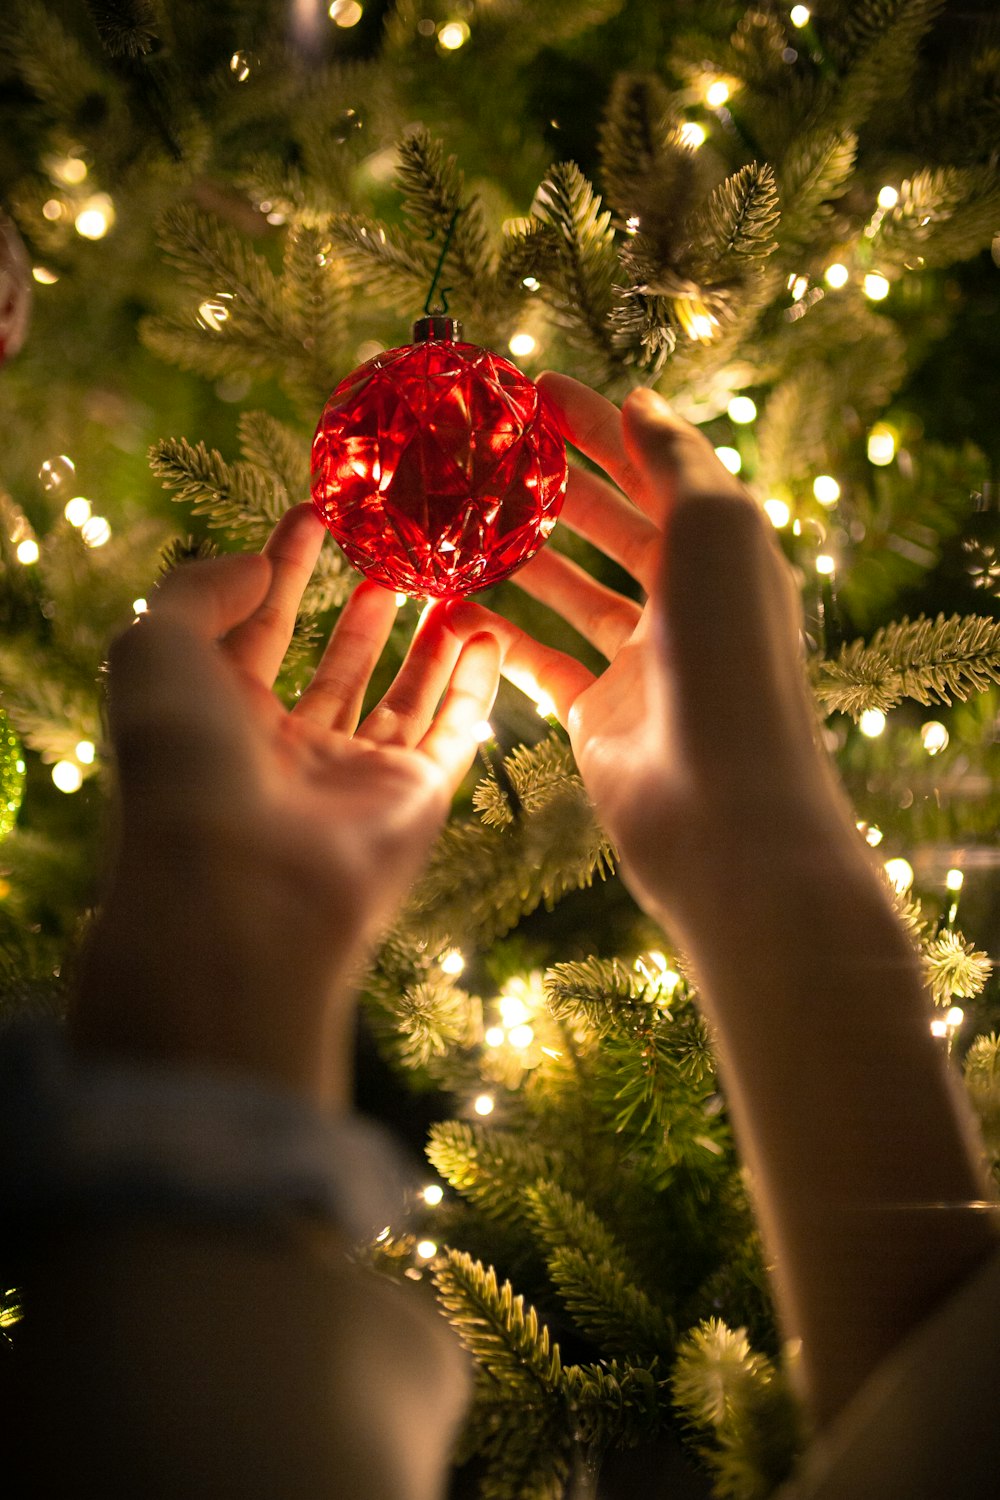 a person holding a red ornament in front of a christmas tree